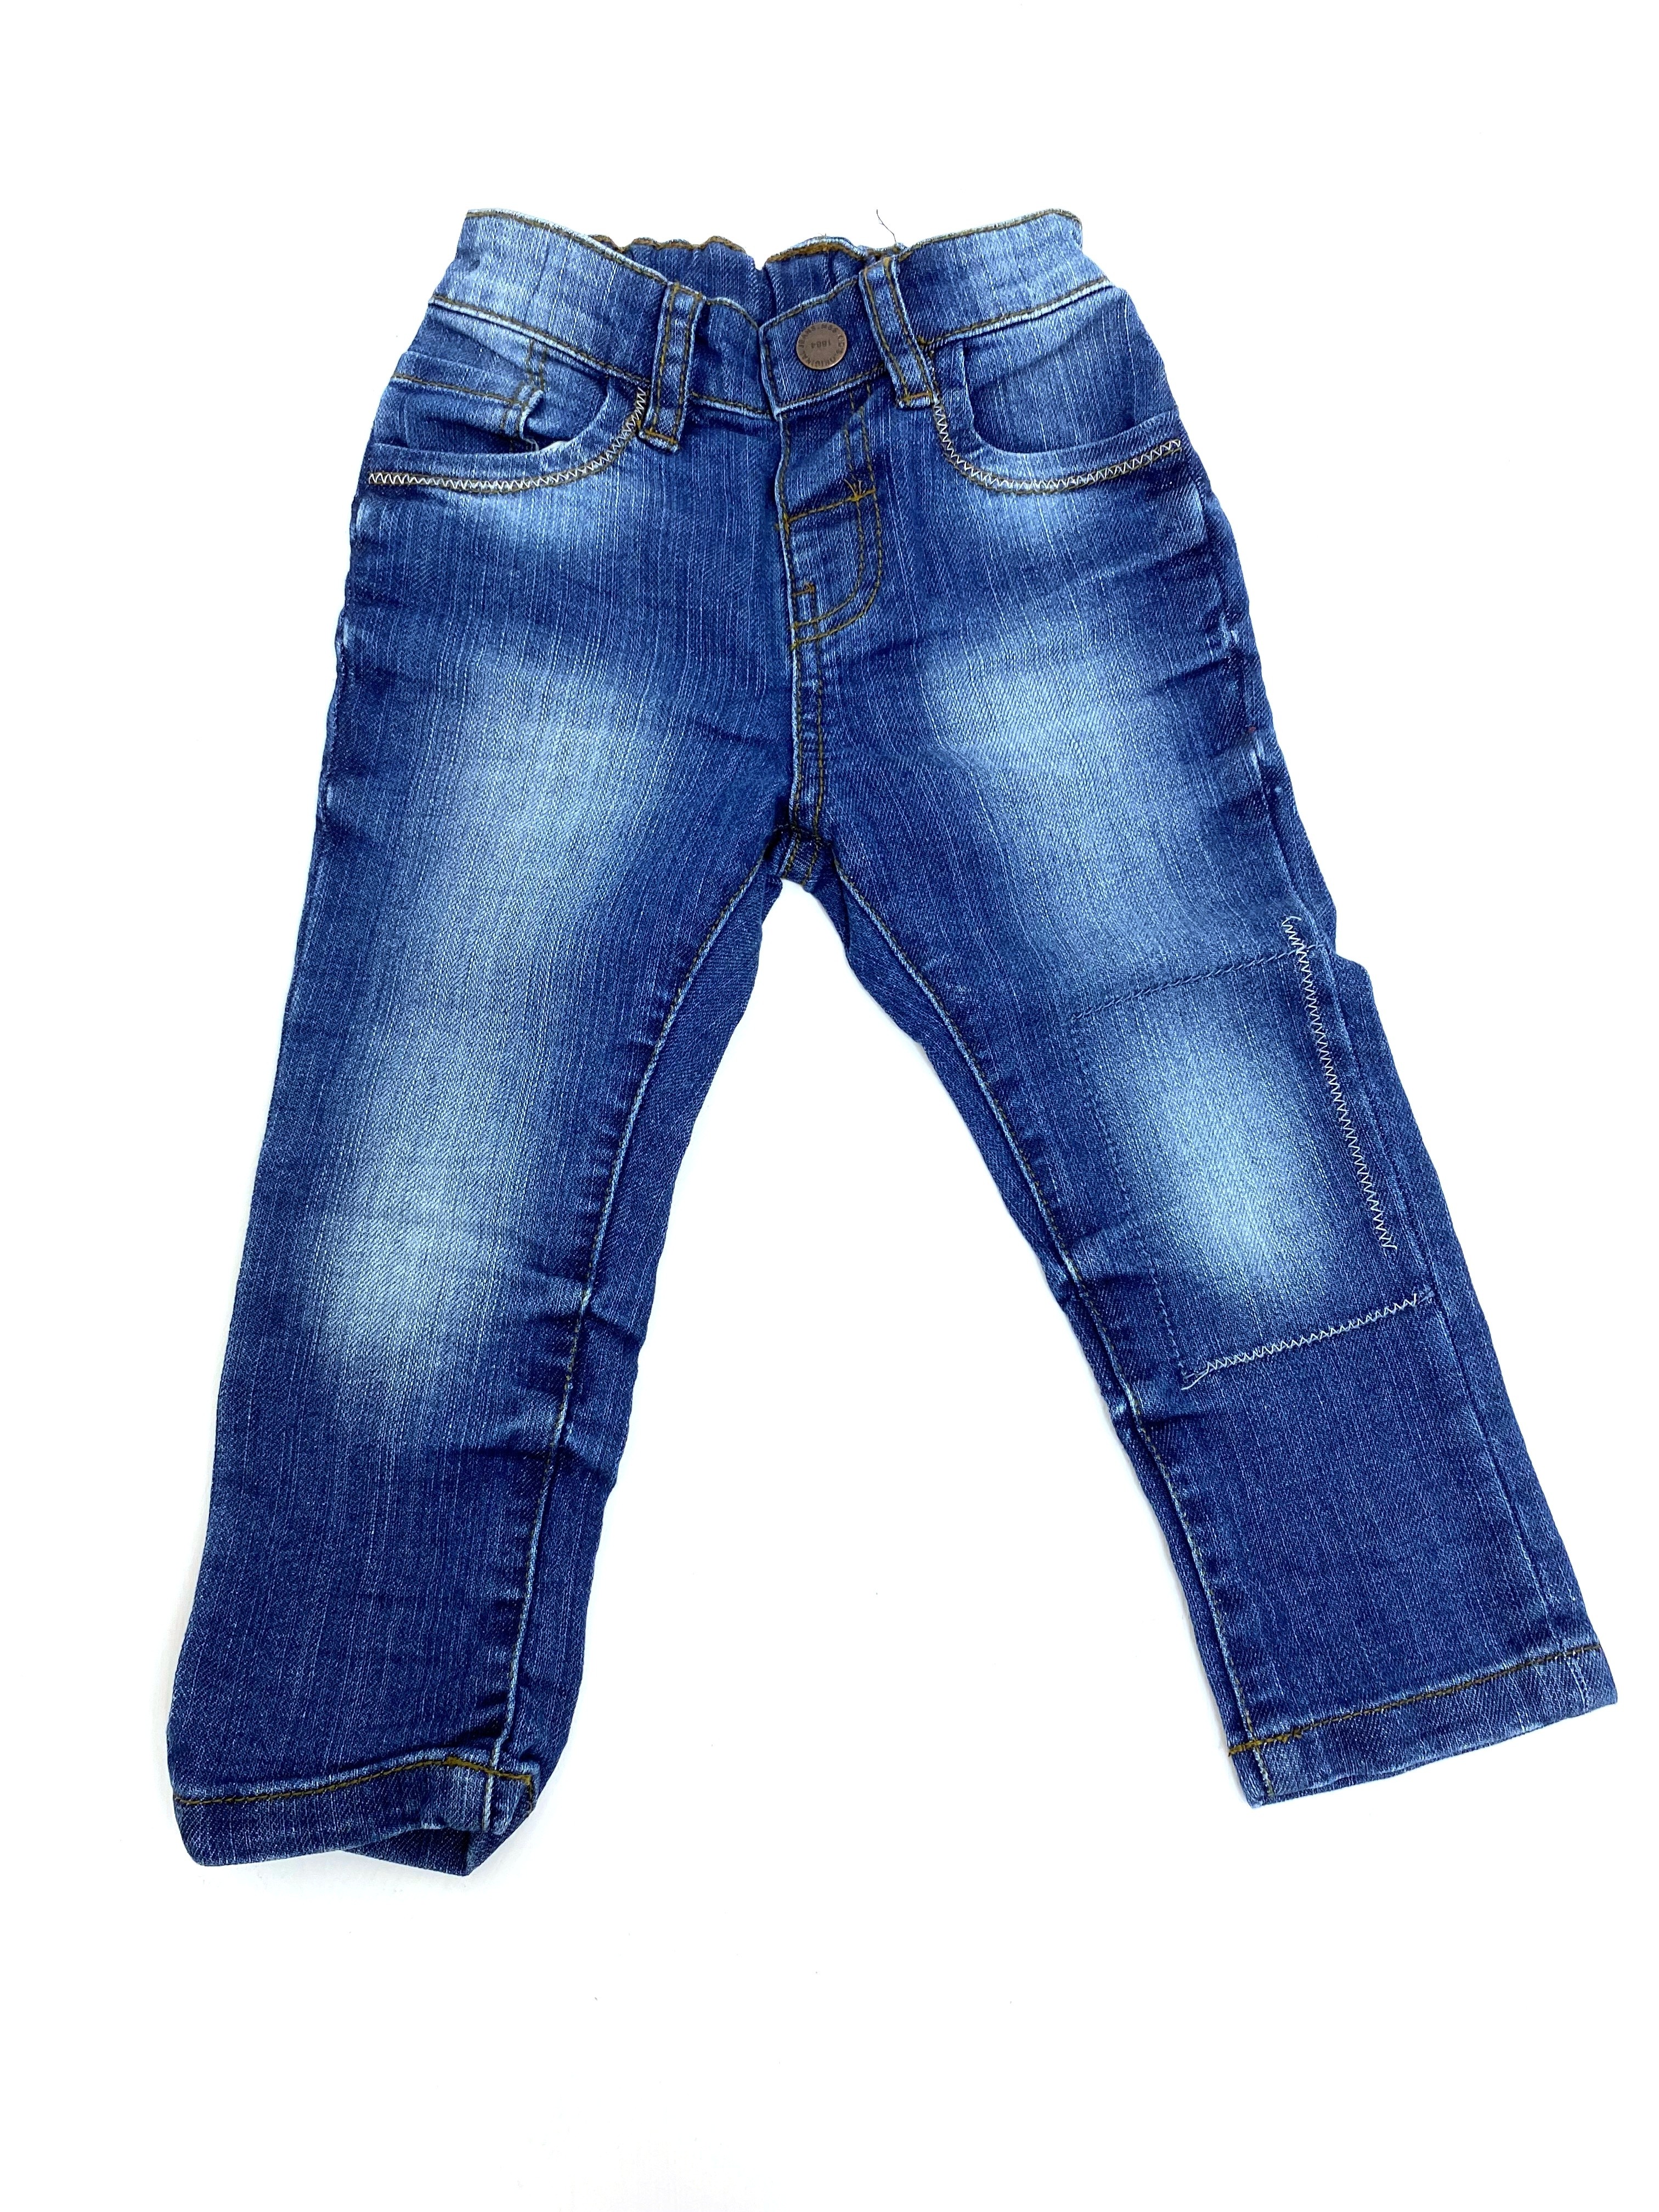 Ex Store Baby Boys Denim Blue Jeans PACK OF 6